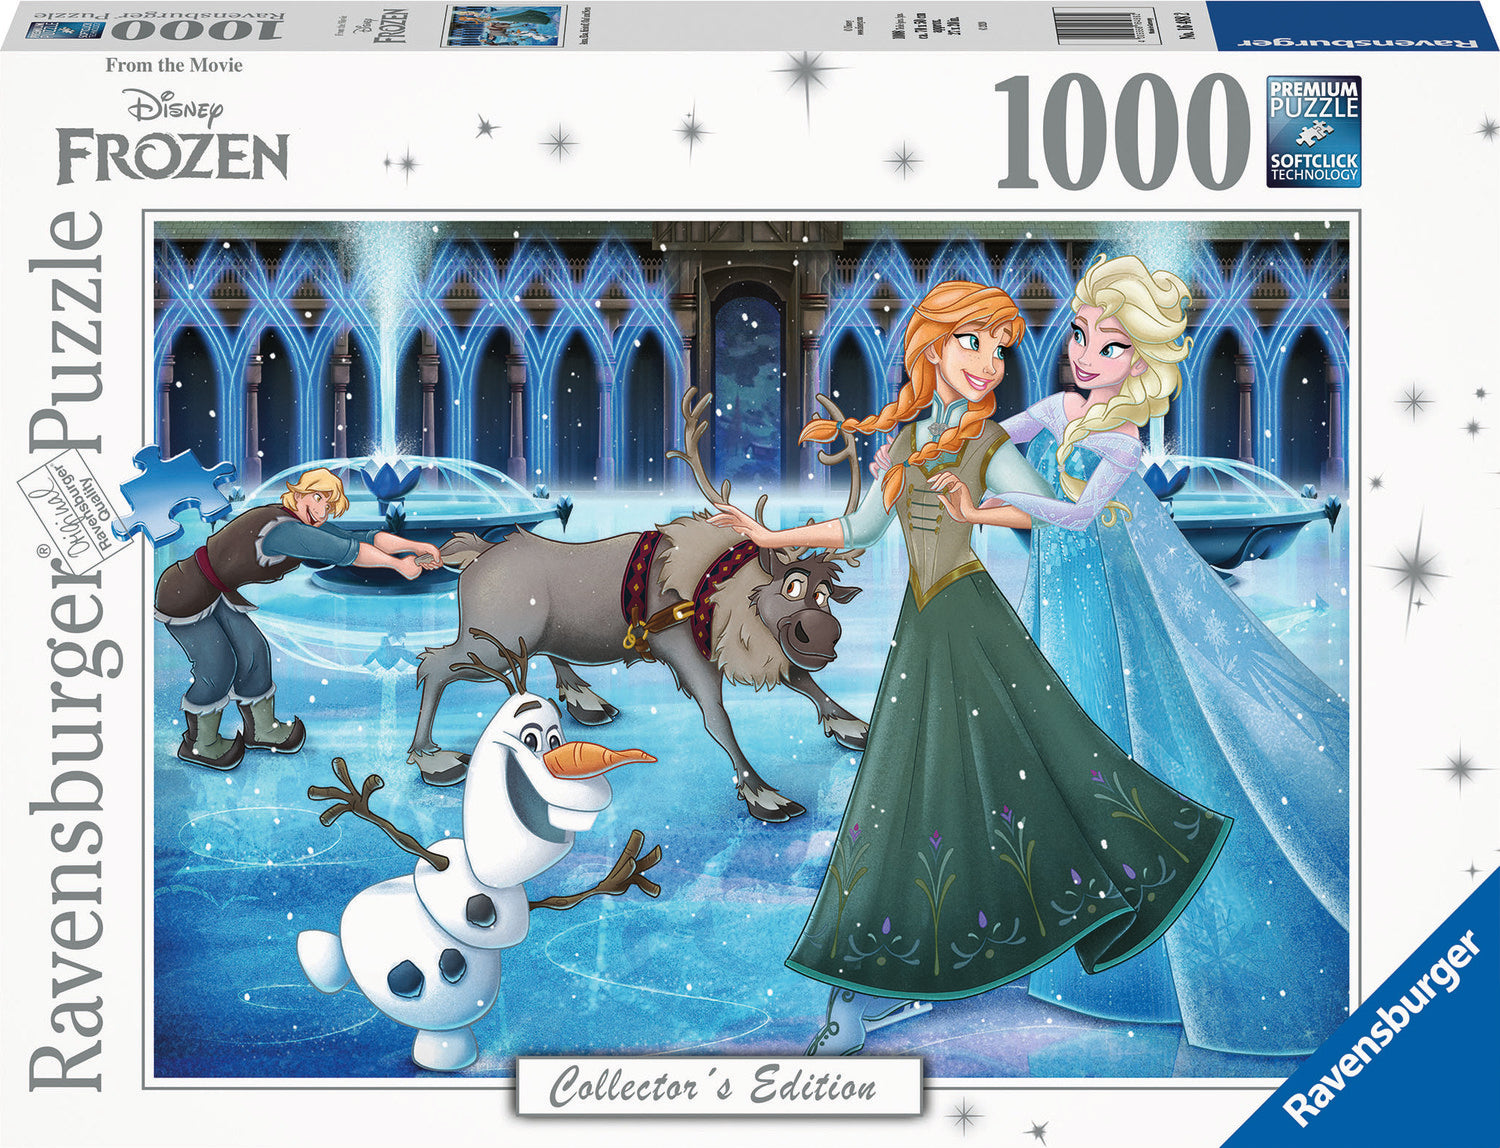 Frozen (collector's edition)